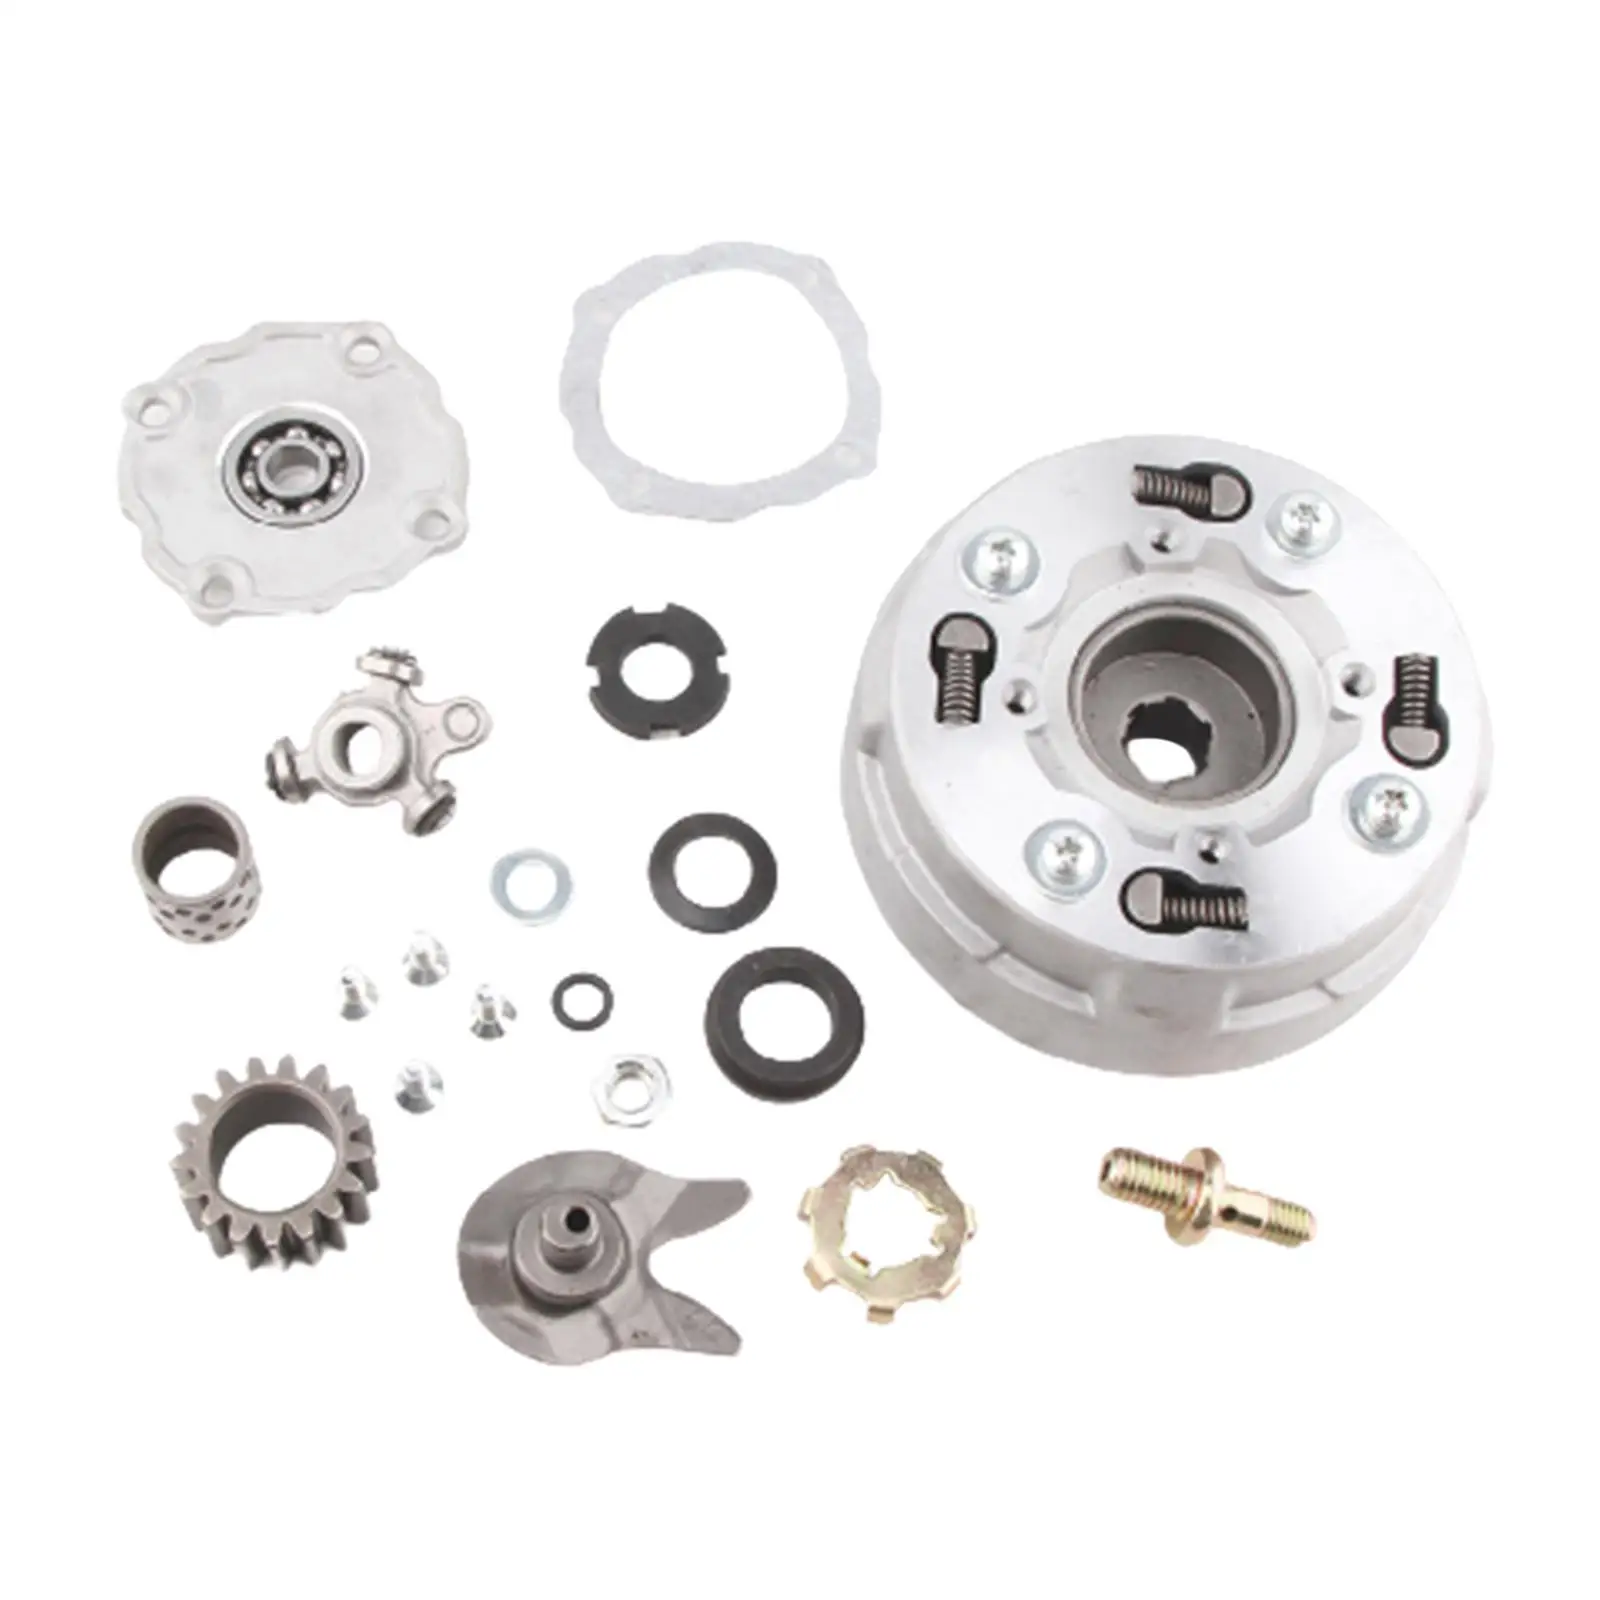 Semi-automatic clutch complete assembly kits for Chinese 90cc ATV,